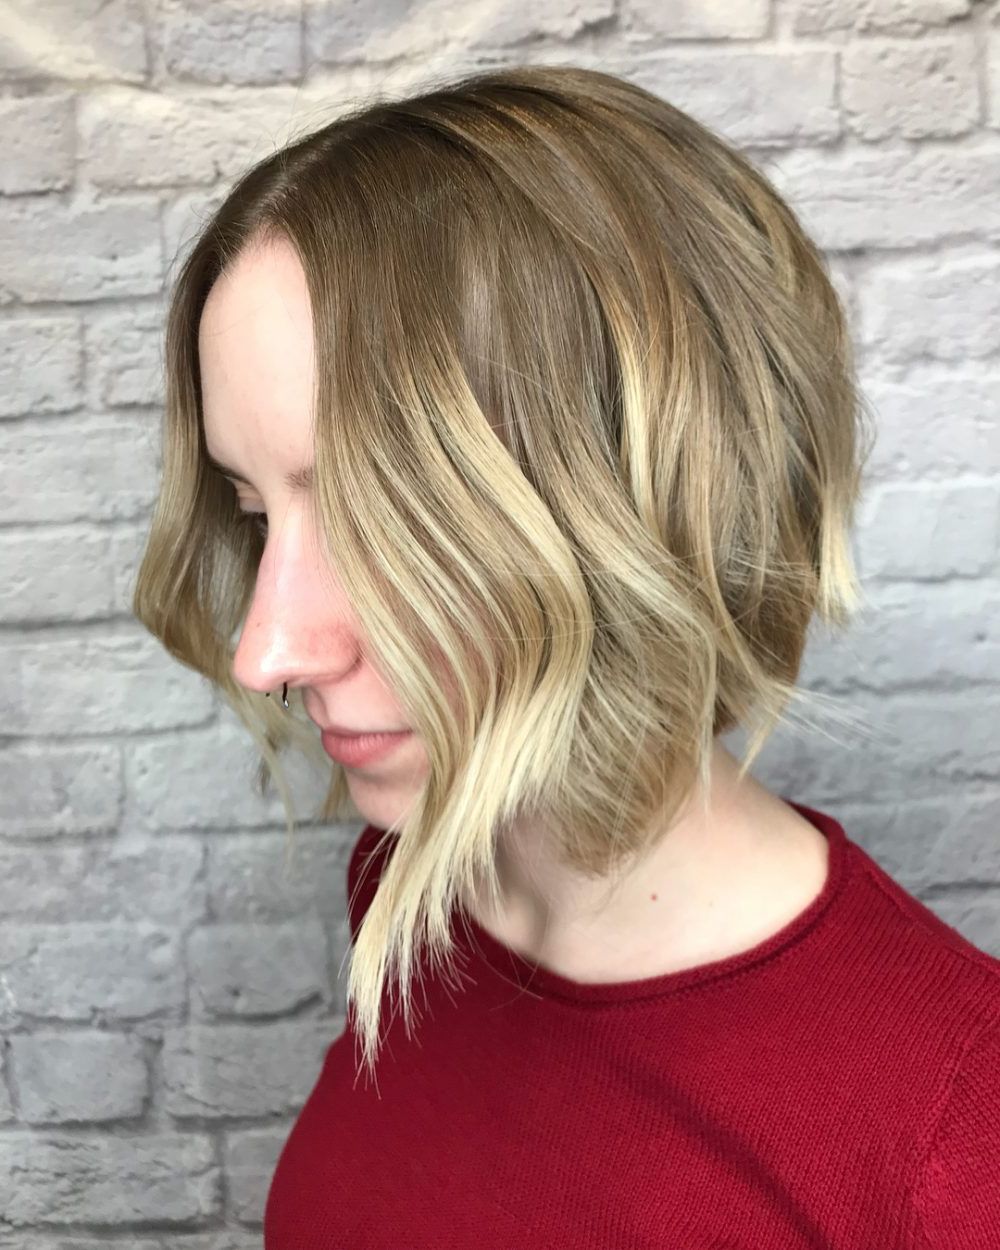 24 Flattering Middle Part Hairstyles In 2019 Throughout Favorite Middle Parting Long Hairstyles With Choppy Layers (Gallery 19 of 20)